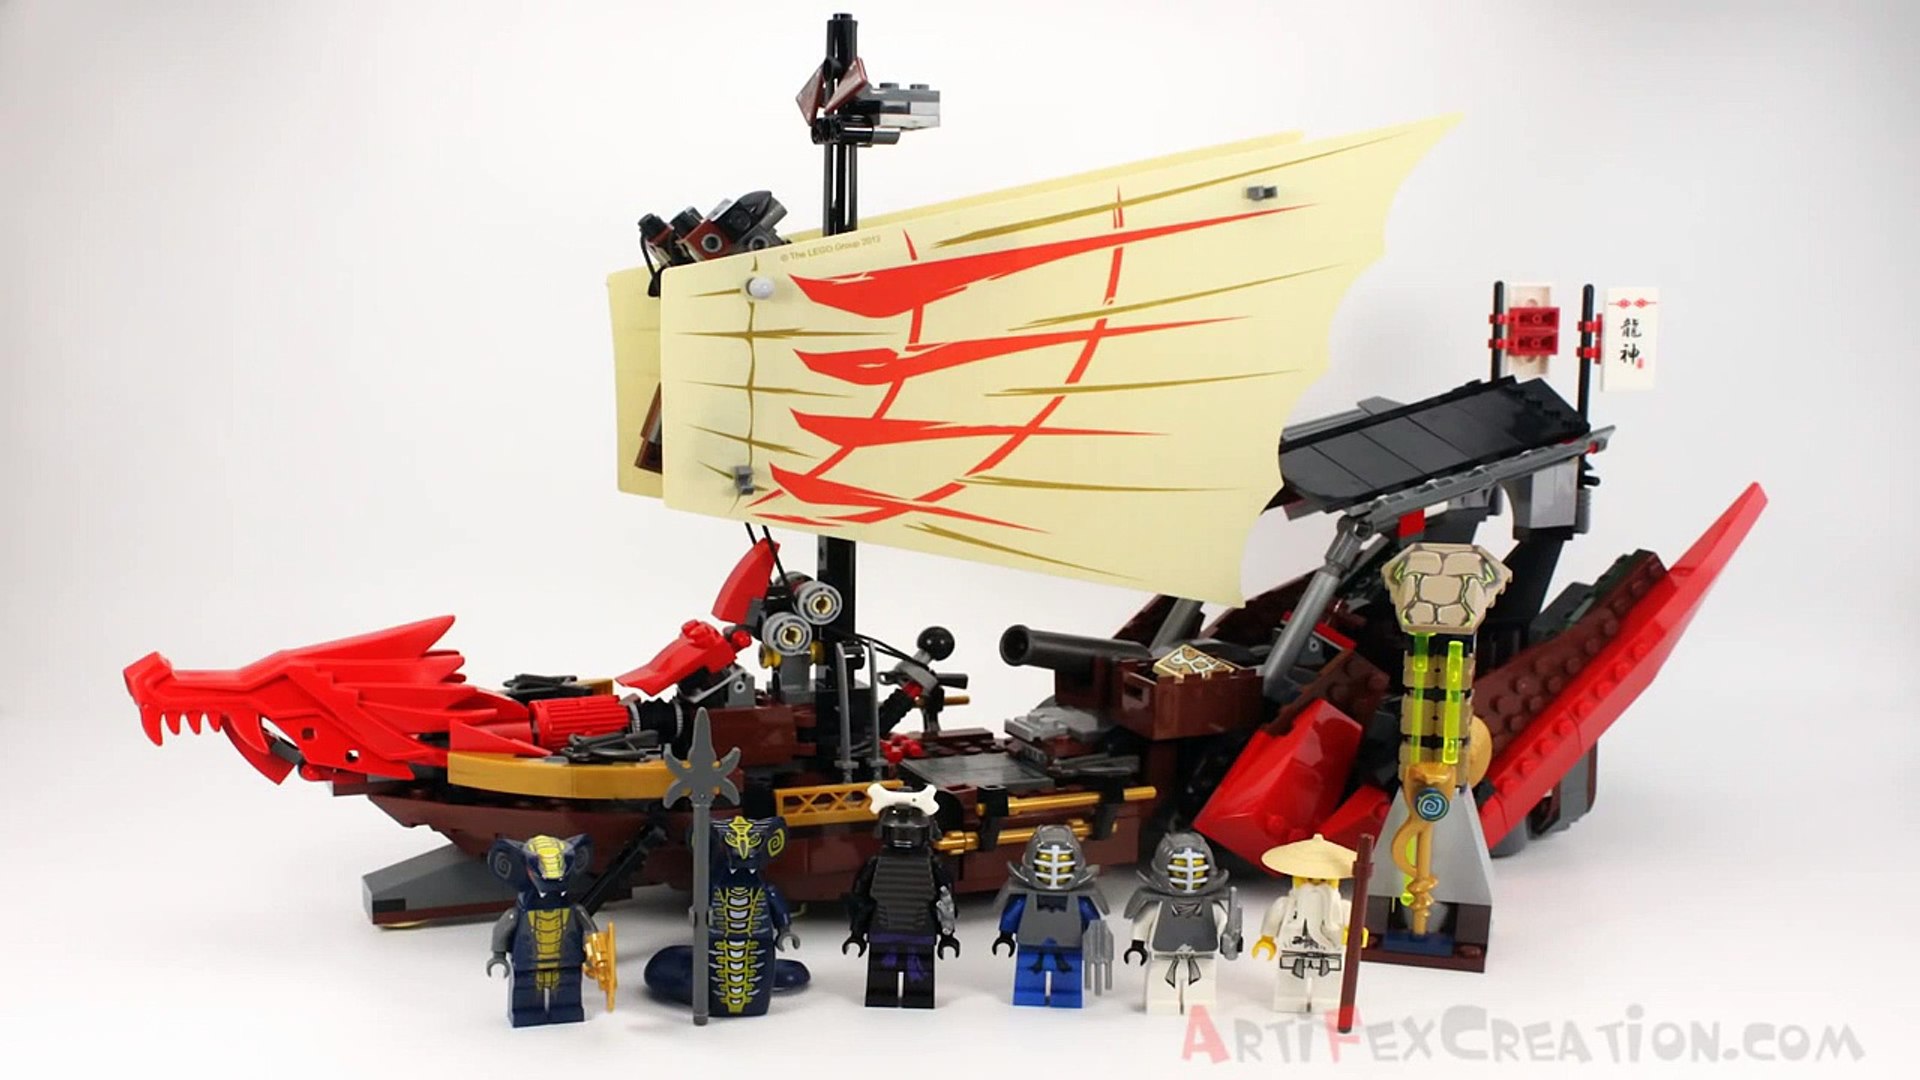 DESTINYS BOUNTY - Lego NINJAGO Set 9446 - Time-lapse/Stop Motion Build,  Unboxing & Review - Dailymotion Video